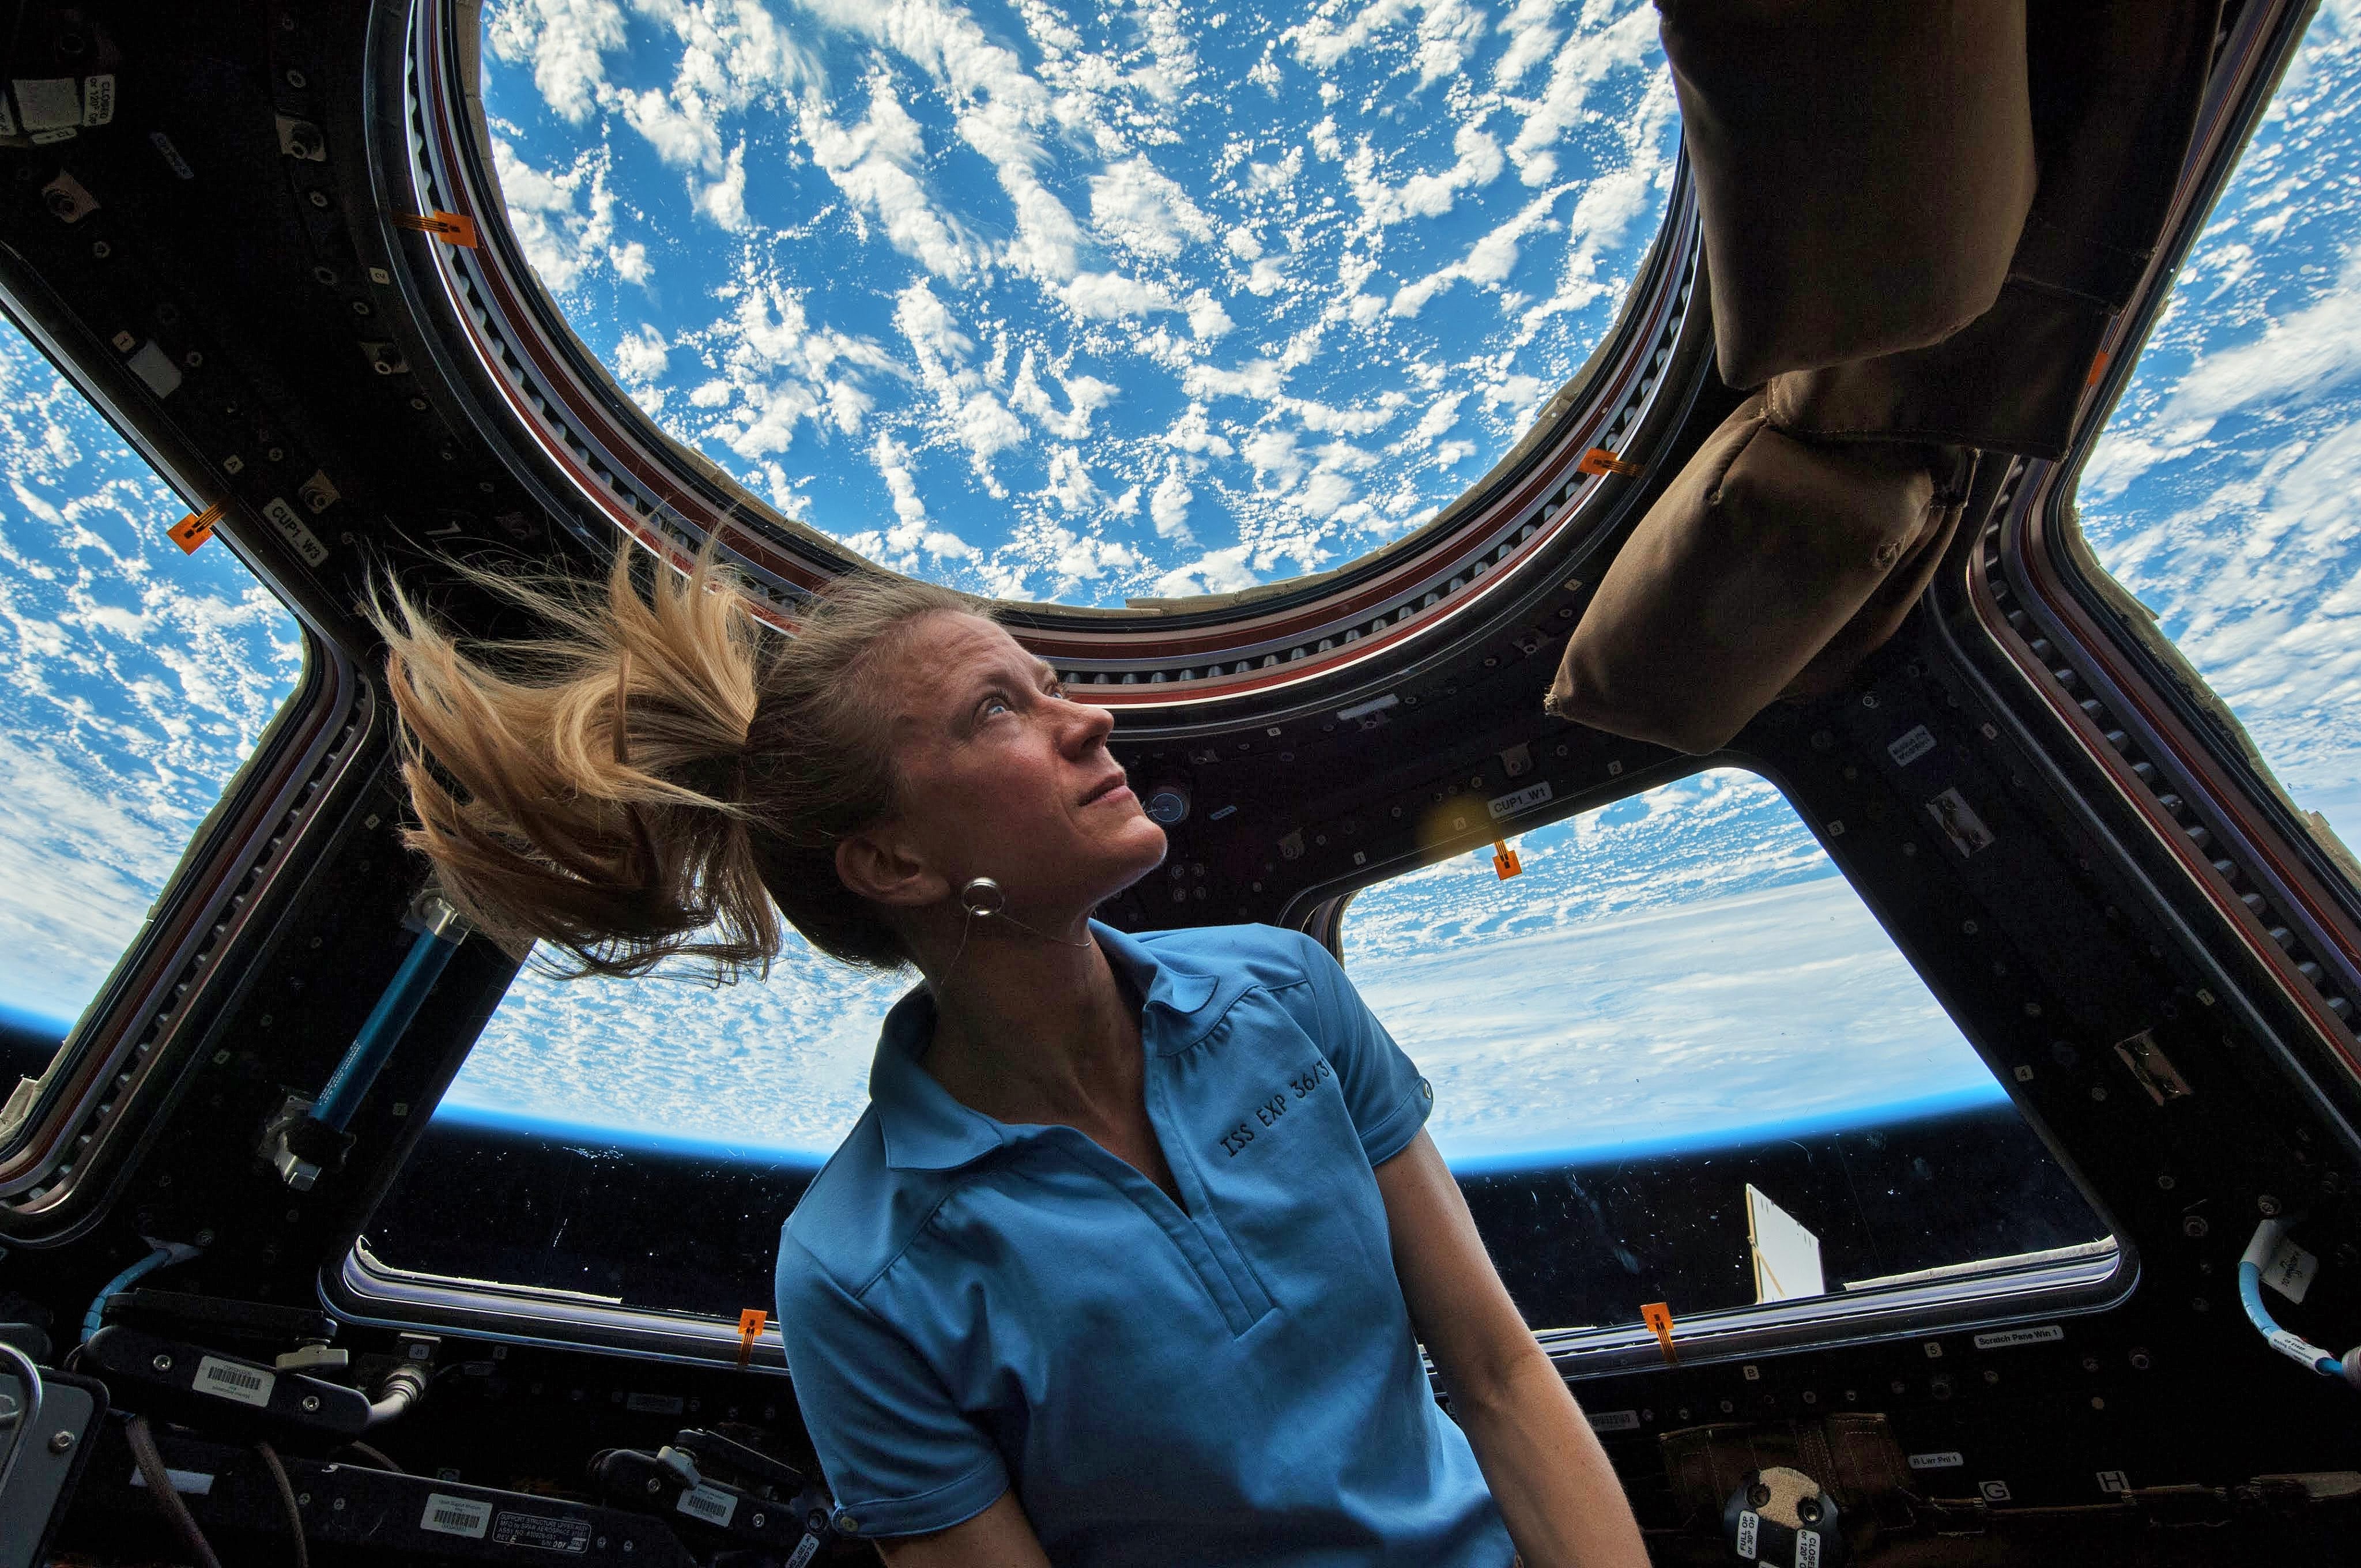 NASA Astronaut Karen Nyberg in the cupola module on the International Space Station (ISS). She has a degree in mechanical engineering and her studies centered on human thermoregulation and experimental metabolic testing and control, and focusing on the control of thermal neutrality in space suits.